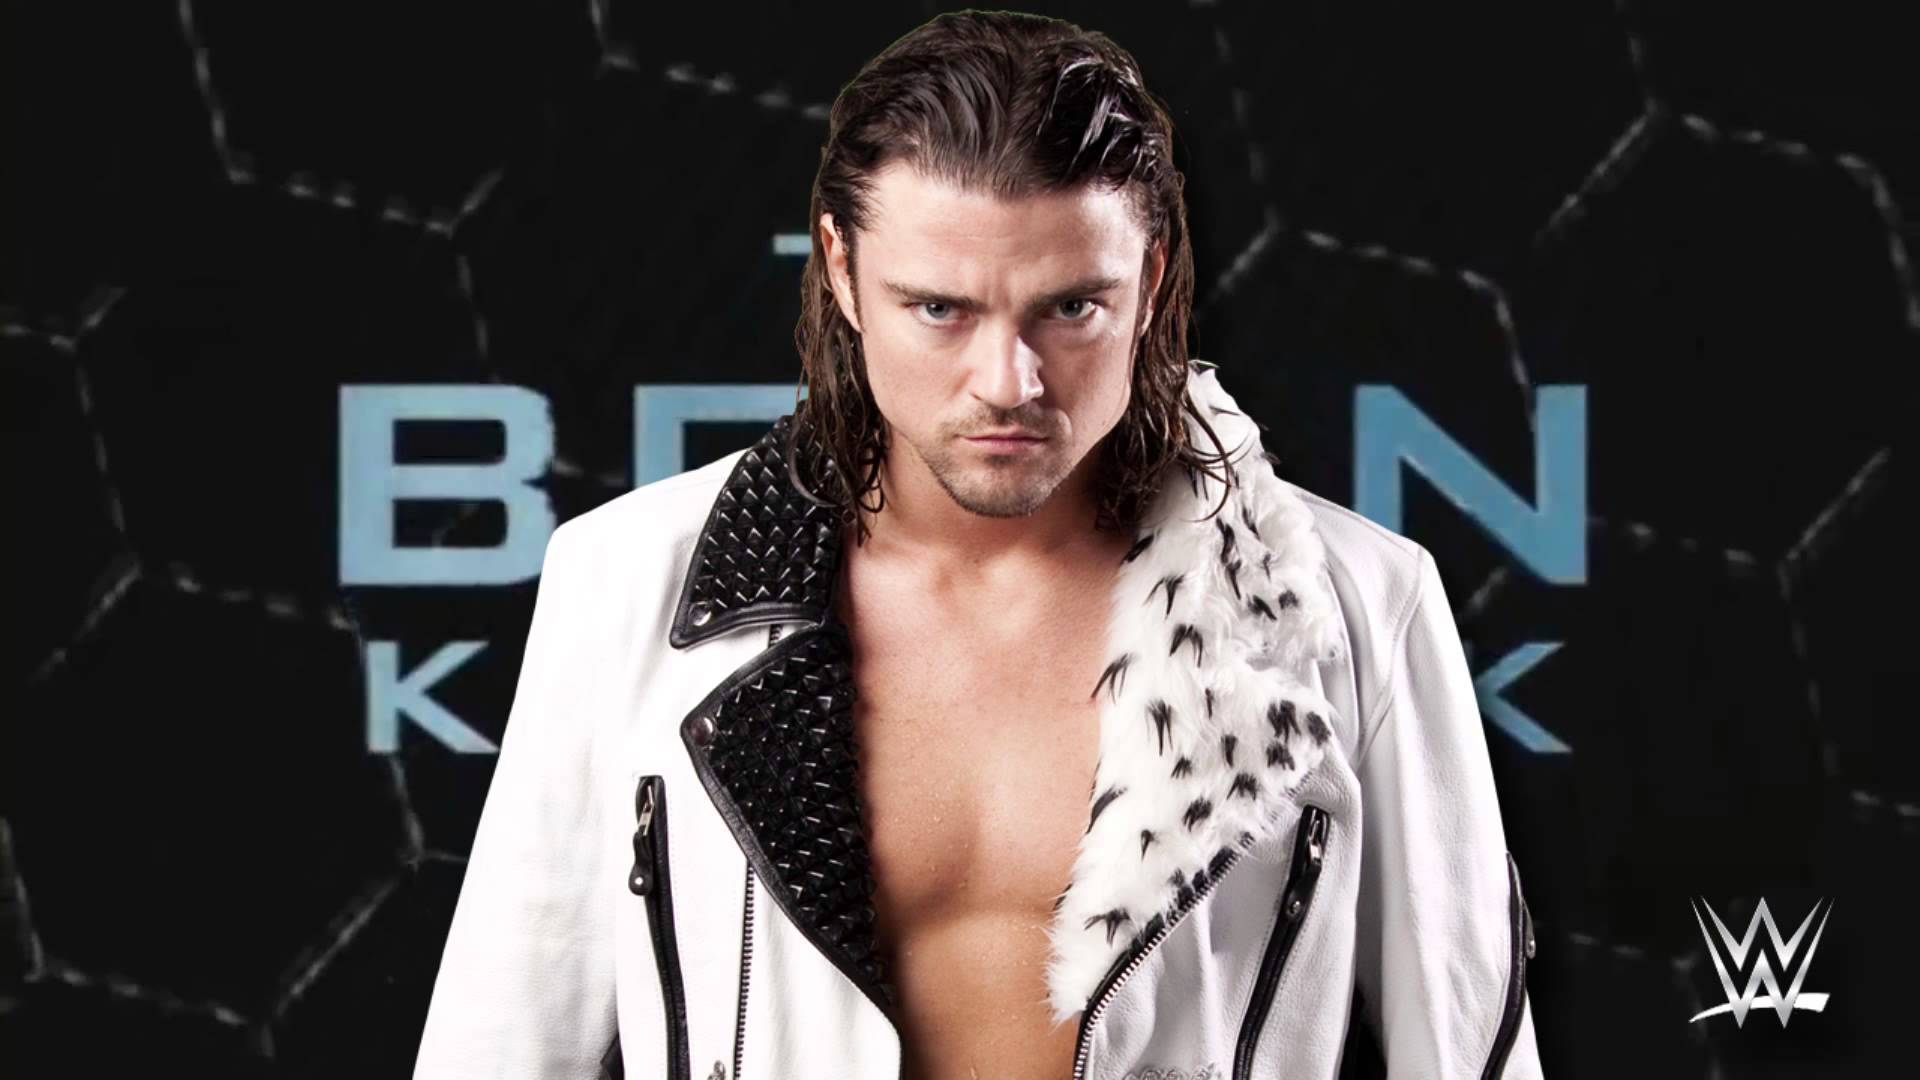 Happy birthday to the former wwe Cruiseweight Champion I miss you brian kendrick!!!! 